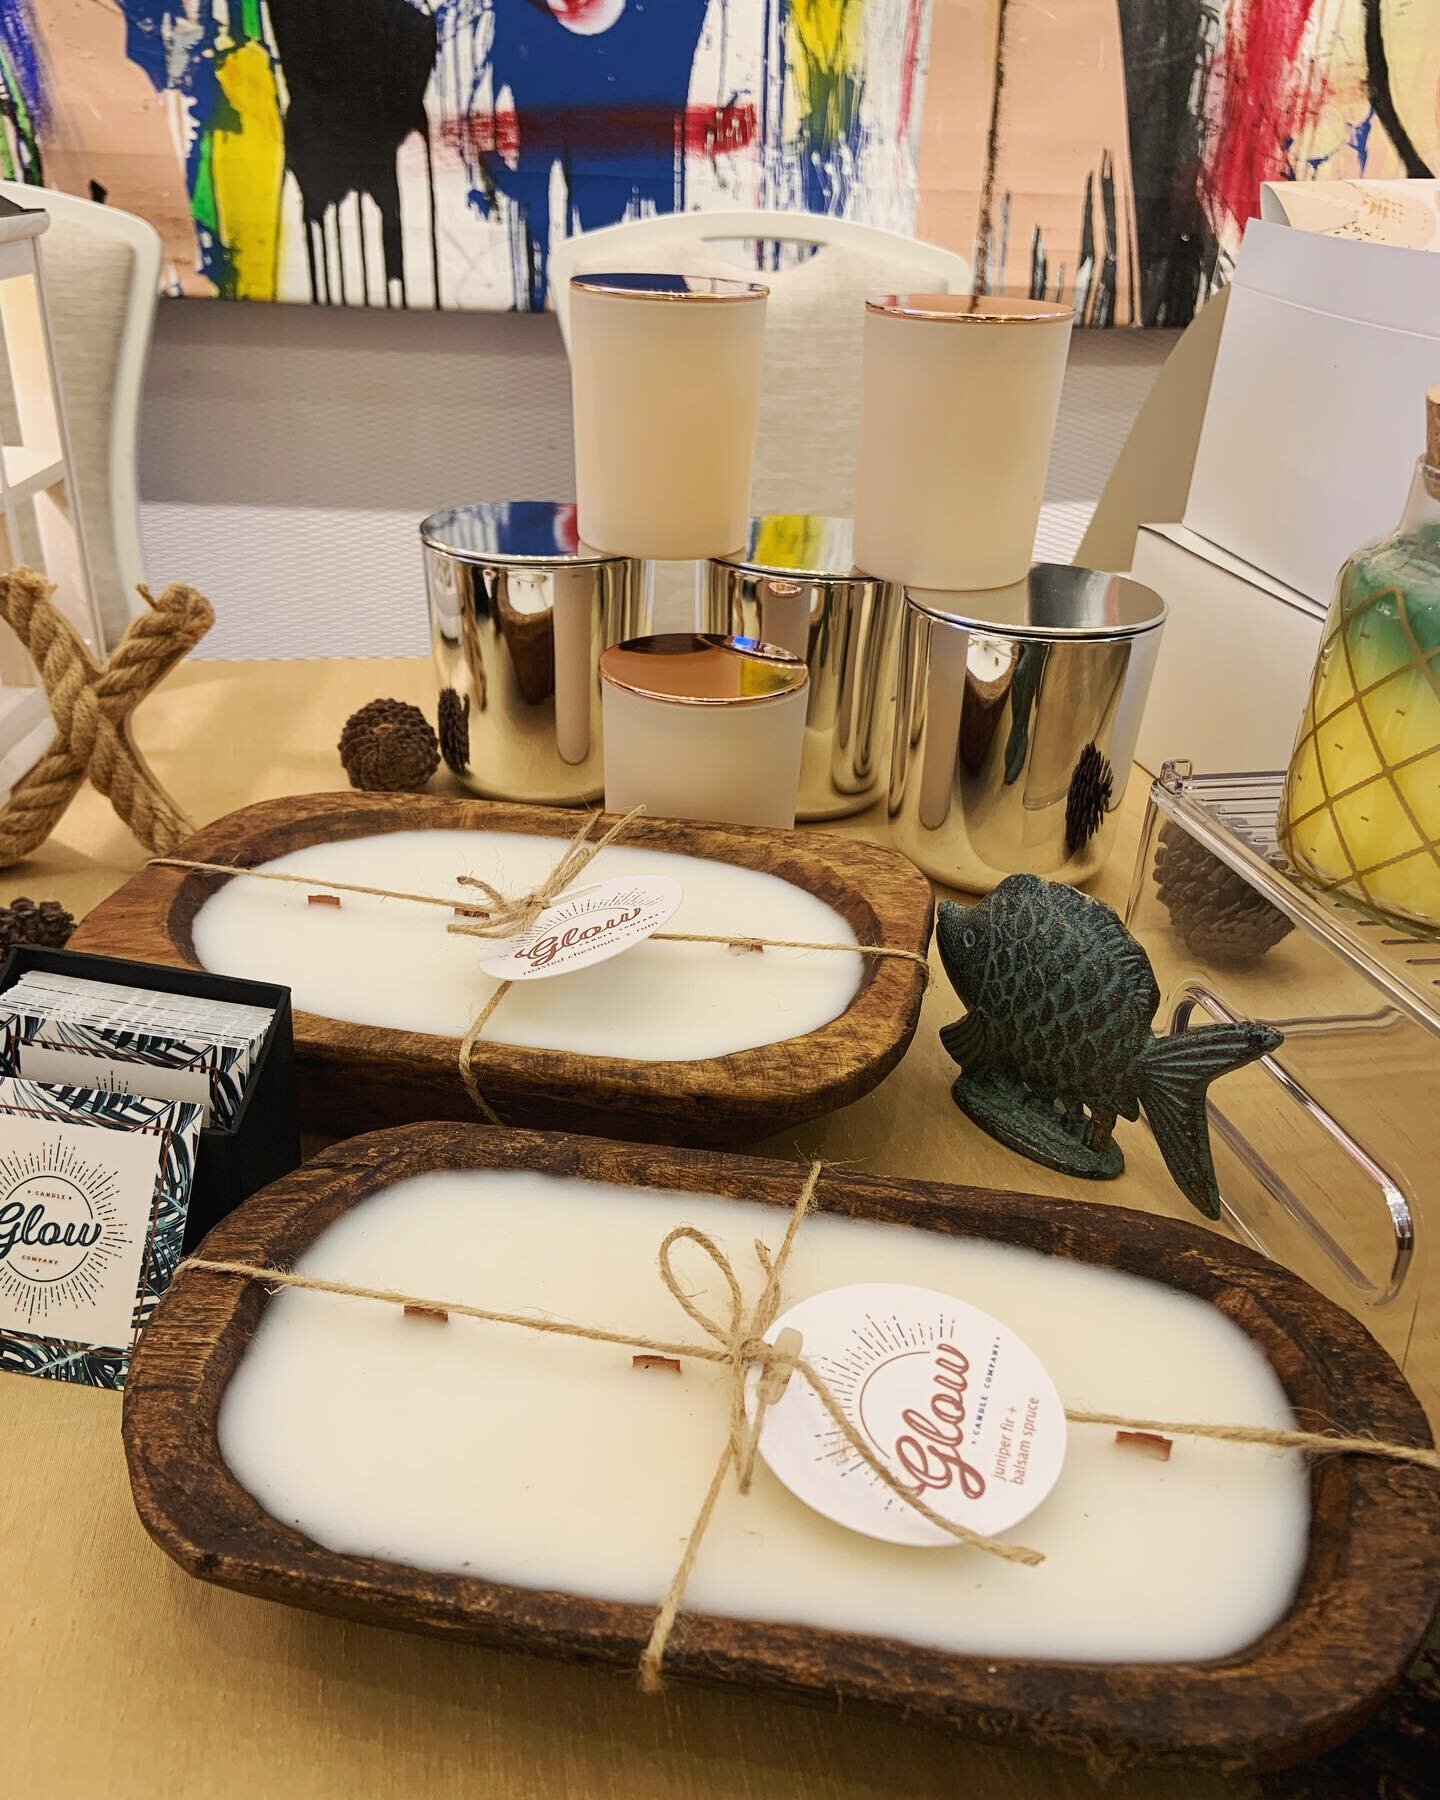 Our display featured wax melts, luxe and fruit jar candles, dough bowl candles, and more! &bull;

#glowcandlecompany #glowsignature #fruitjarcandles  #doughbowlcandles #waxmelts #glowluxe #bahamascandle #glowgifts #candlestagram #bahamiangifts #giftb